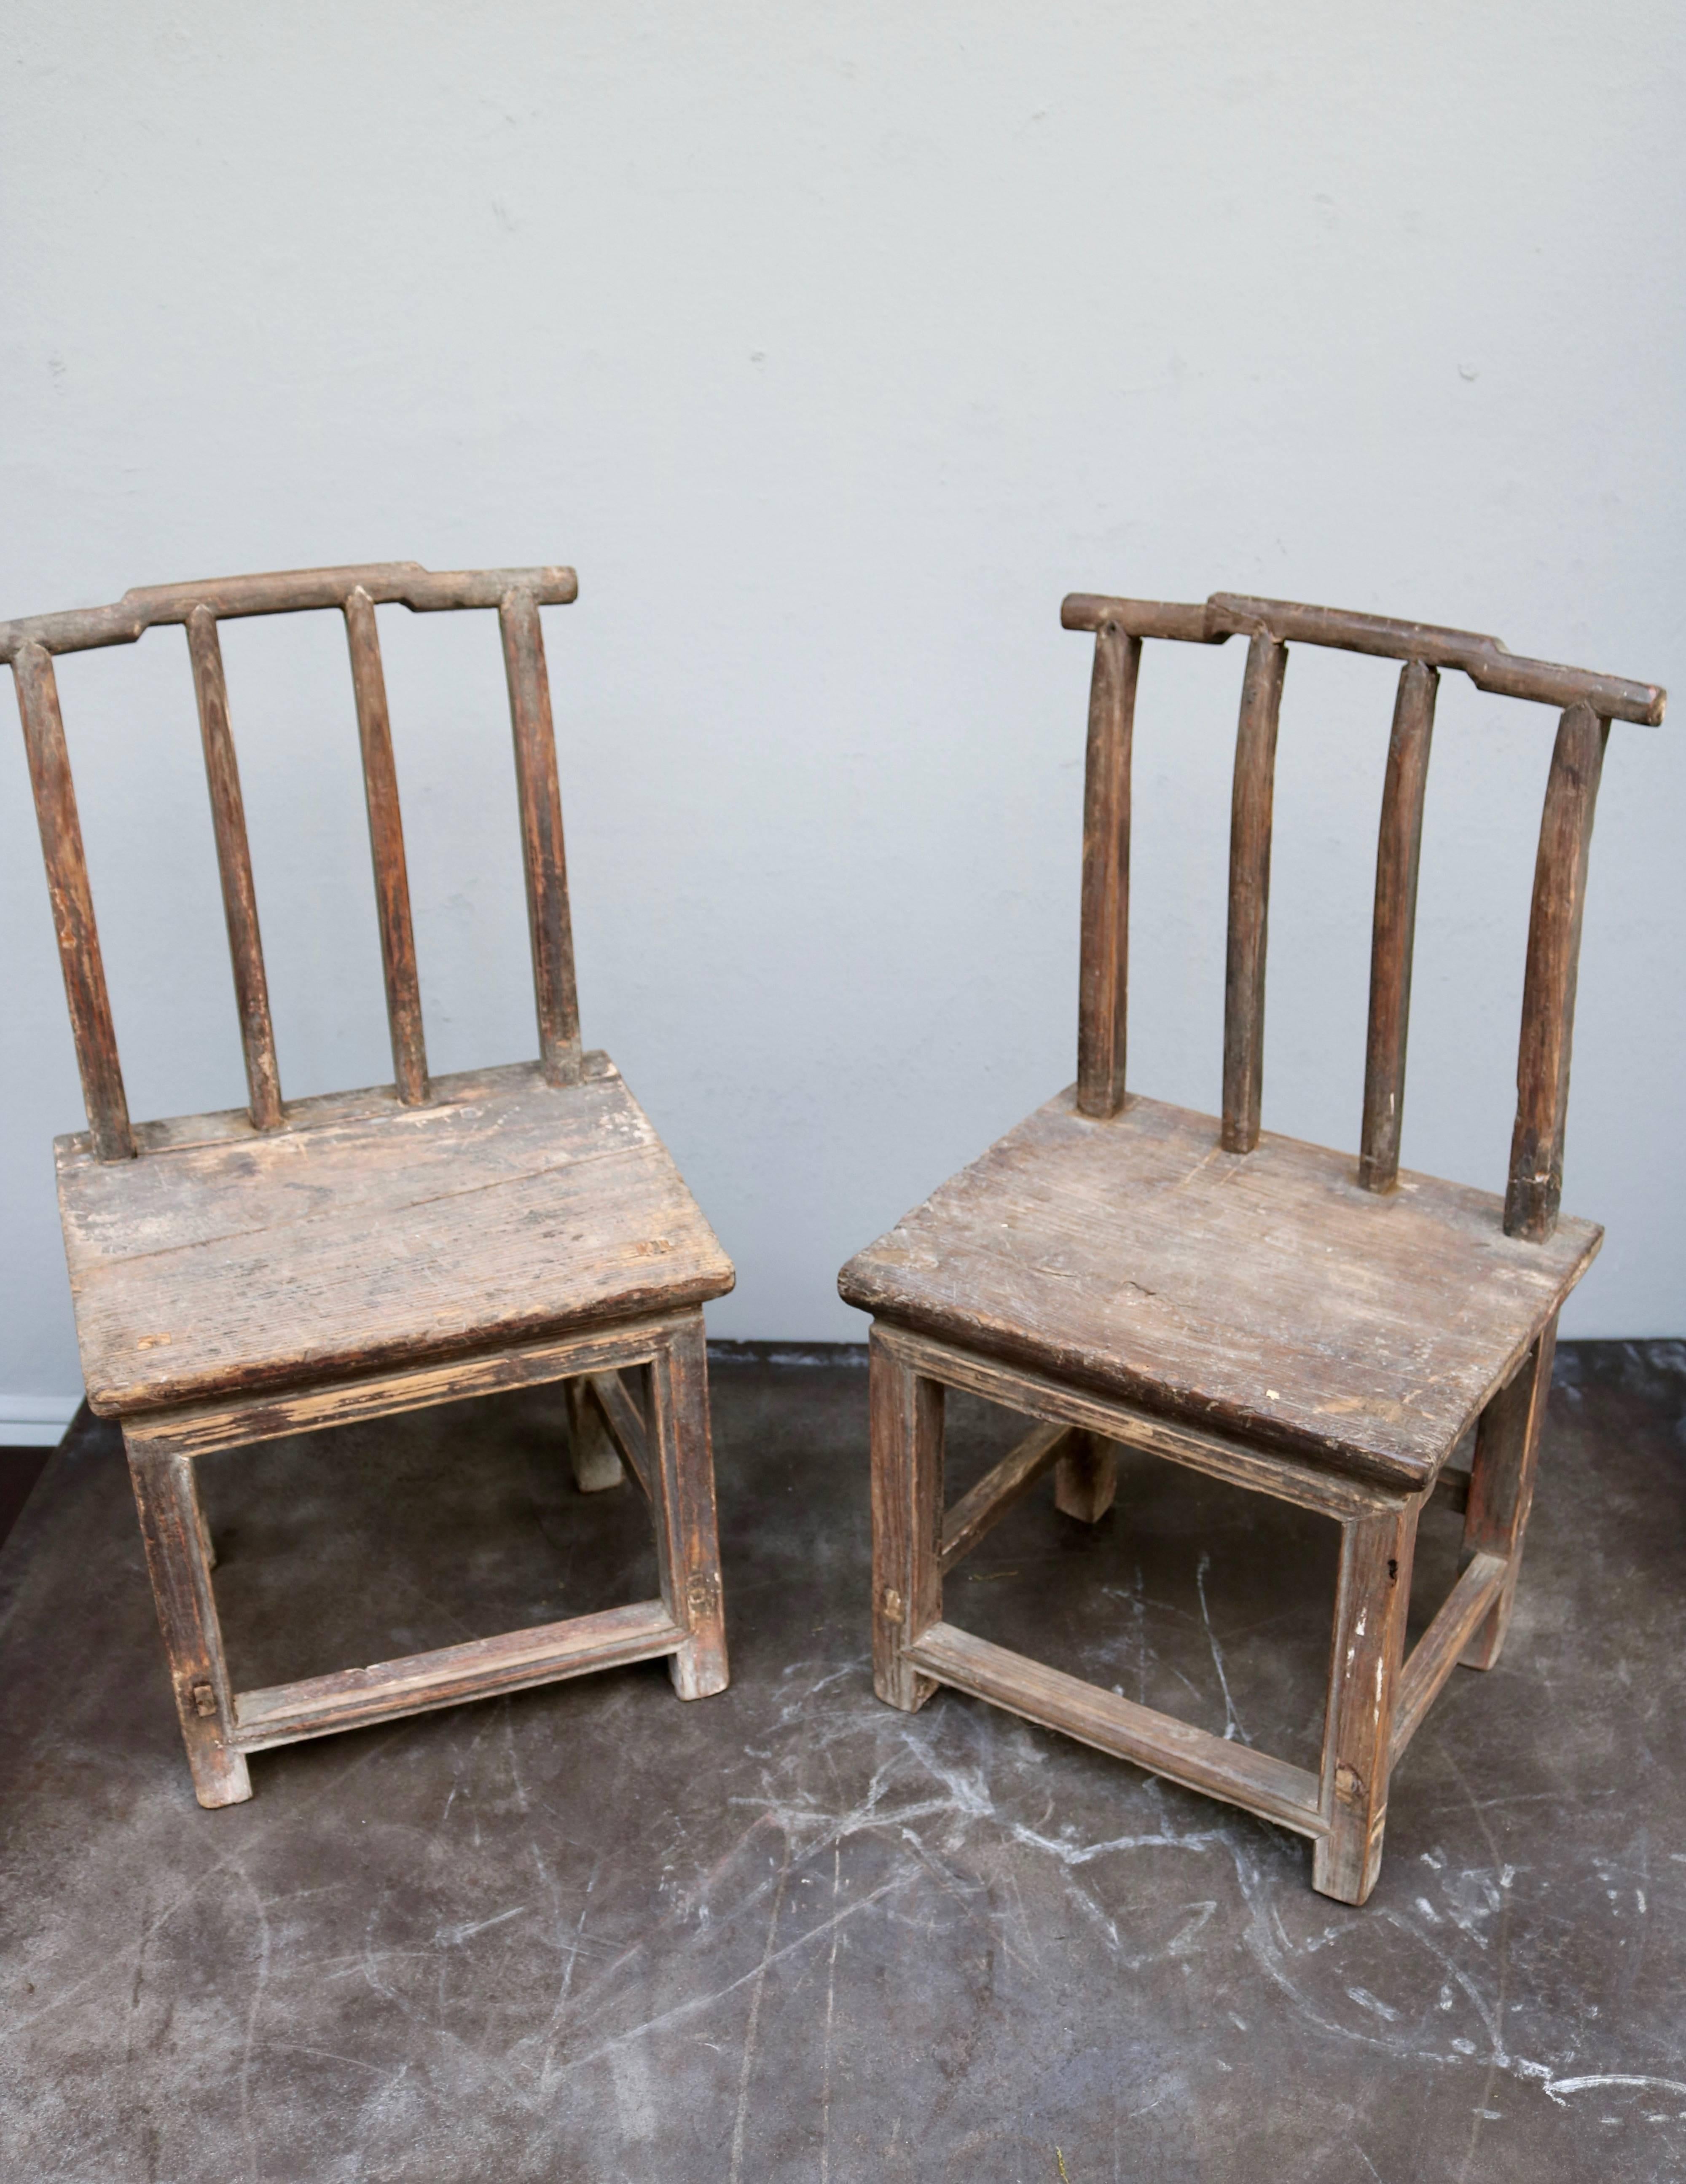 These chairs are sold in a pair of two. The chairs are made in Chinese elmwood from the 19th century.